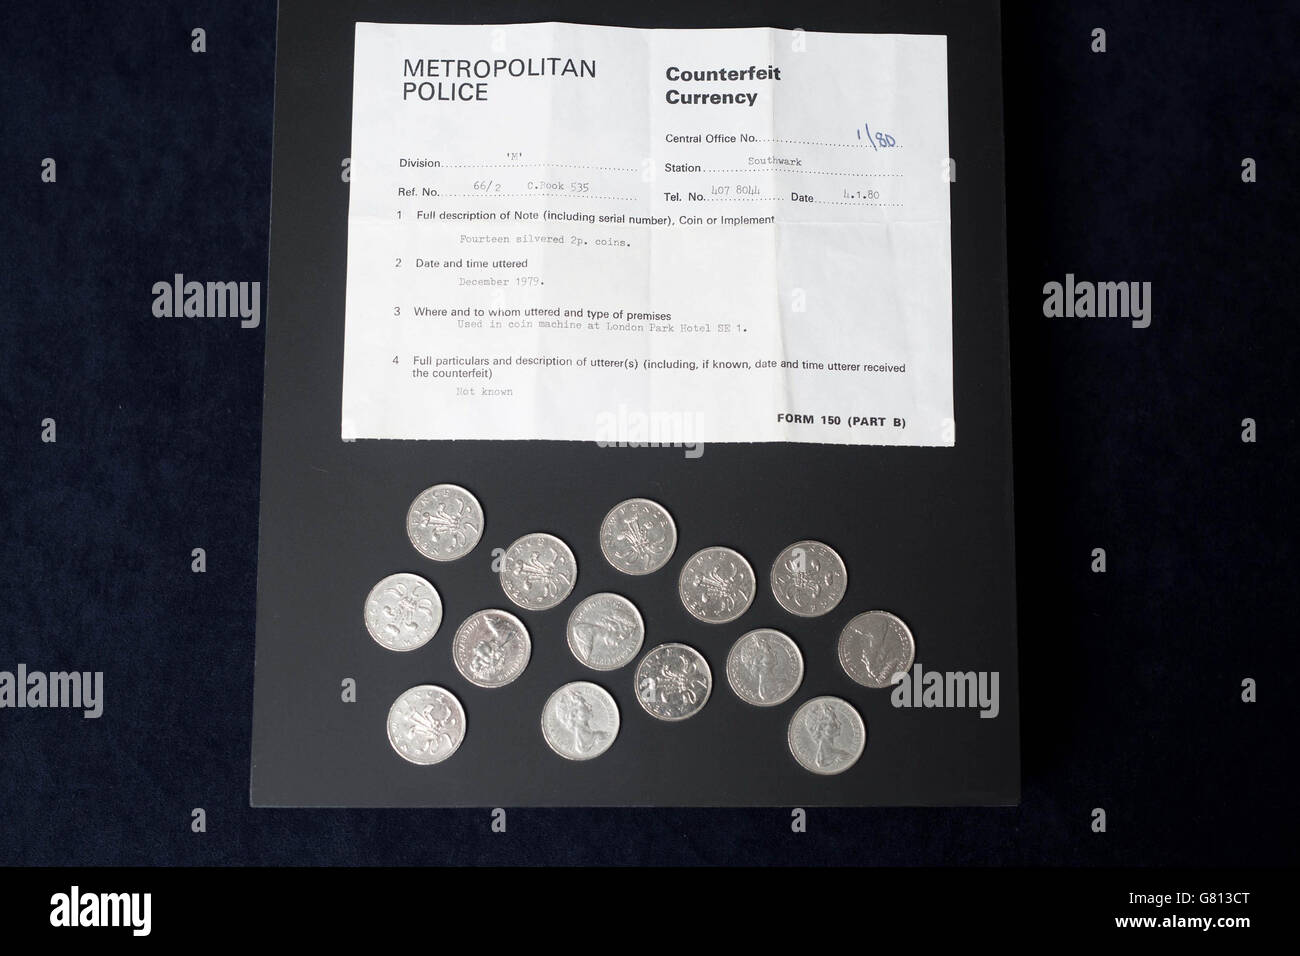 EDITORIAL USE ONLY Fourteen counterfeit silvered 2p coins seized by Metropolitan Police in 1979, which is some of six never-before-seen objects from the Metropolitan Police's hidden Crime Museum, at a preview for the Crime Museum Uncovered exhibition at the Museum of London that will open to the public on 9 October 2015. Stock Photo